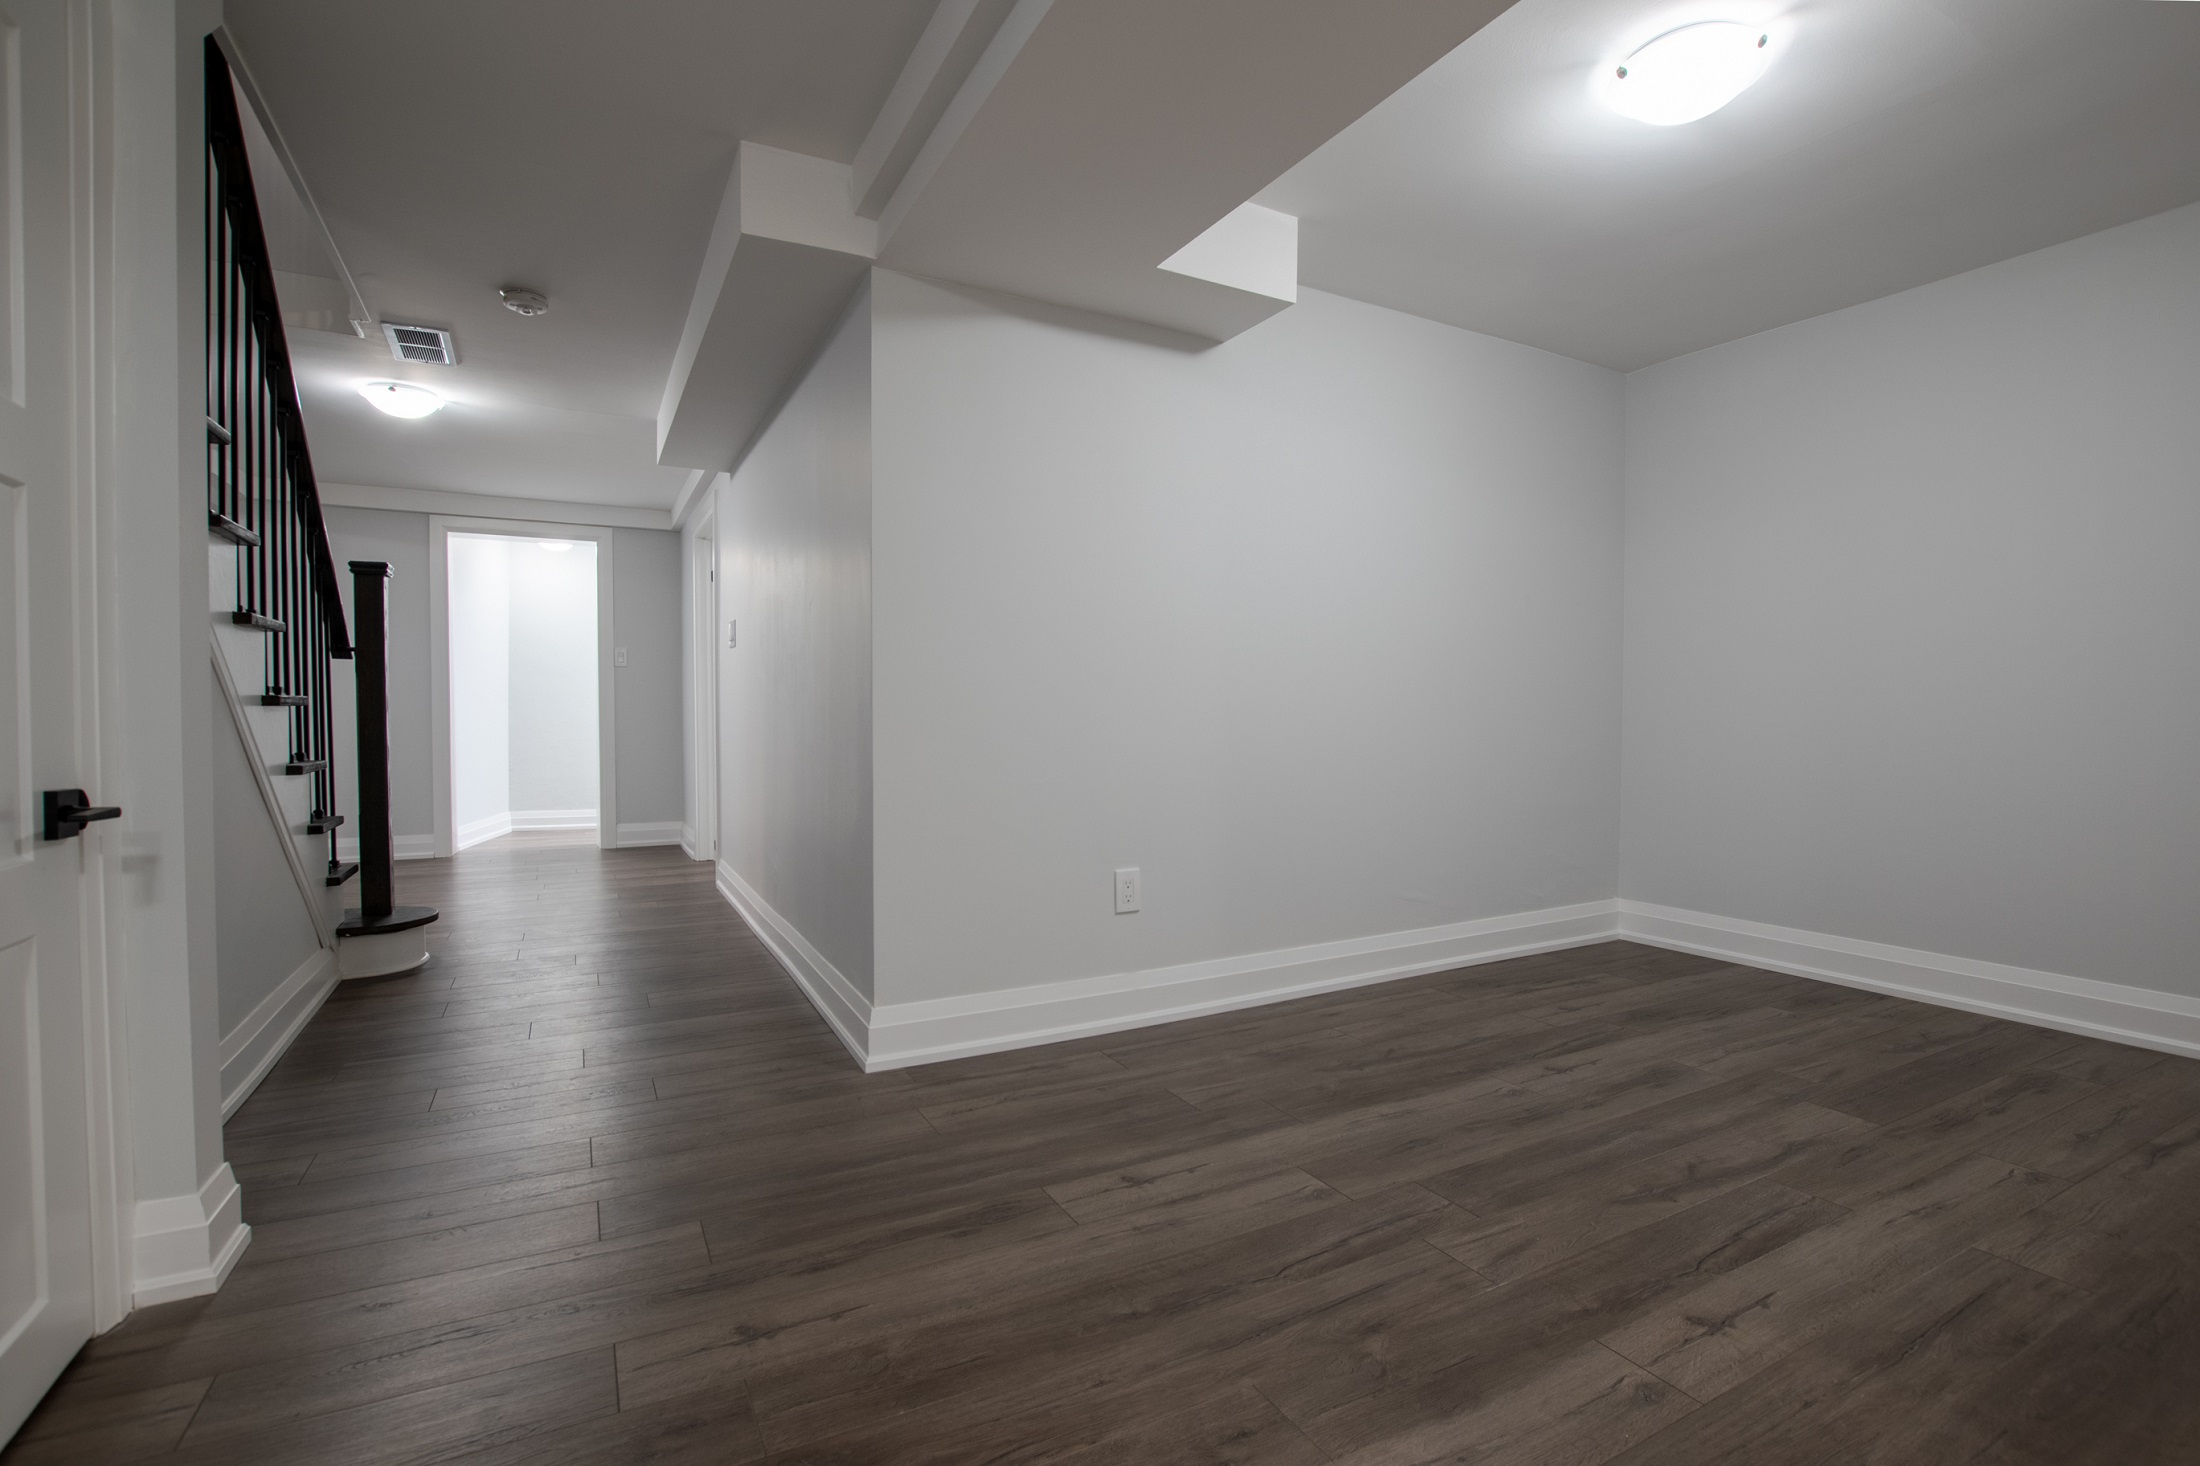 Basement Refinishing Remodeling Contractor in Redding, CT